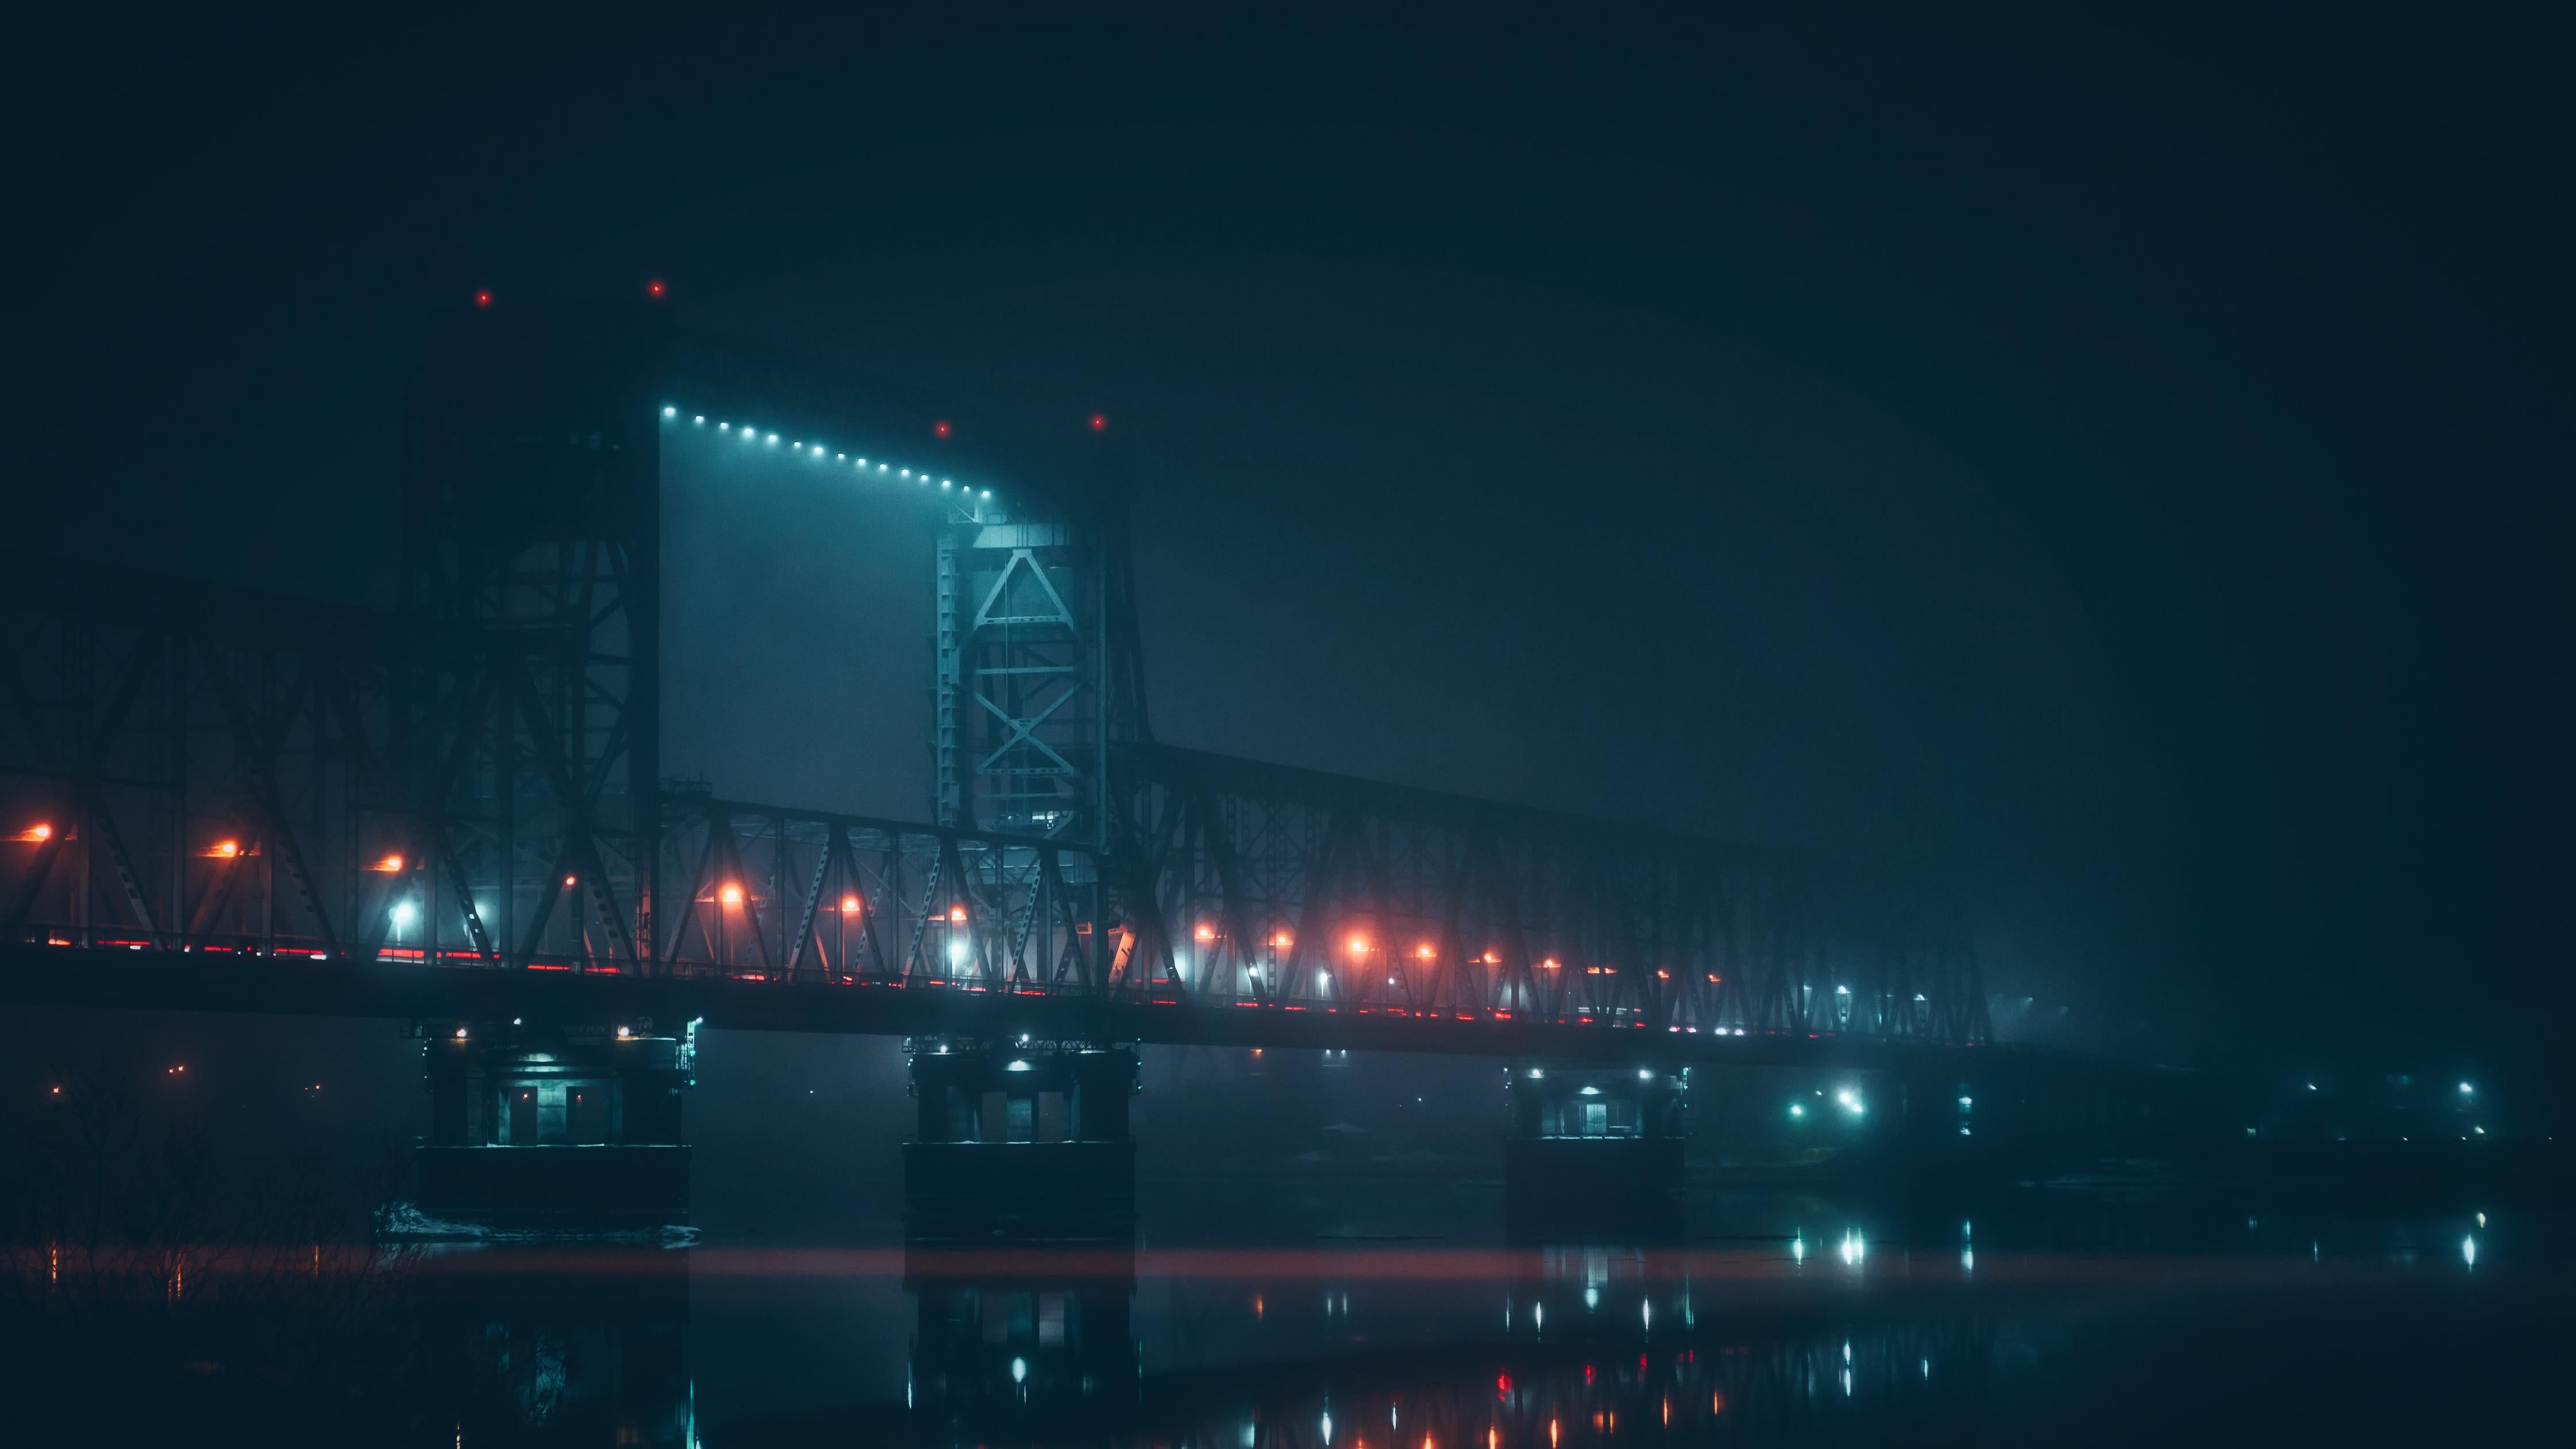 Foggy 4K wallpaper for your desktop or mobile screen free and easy to download